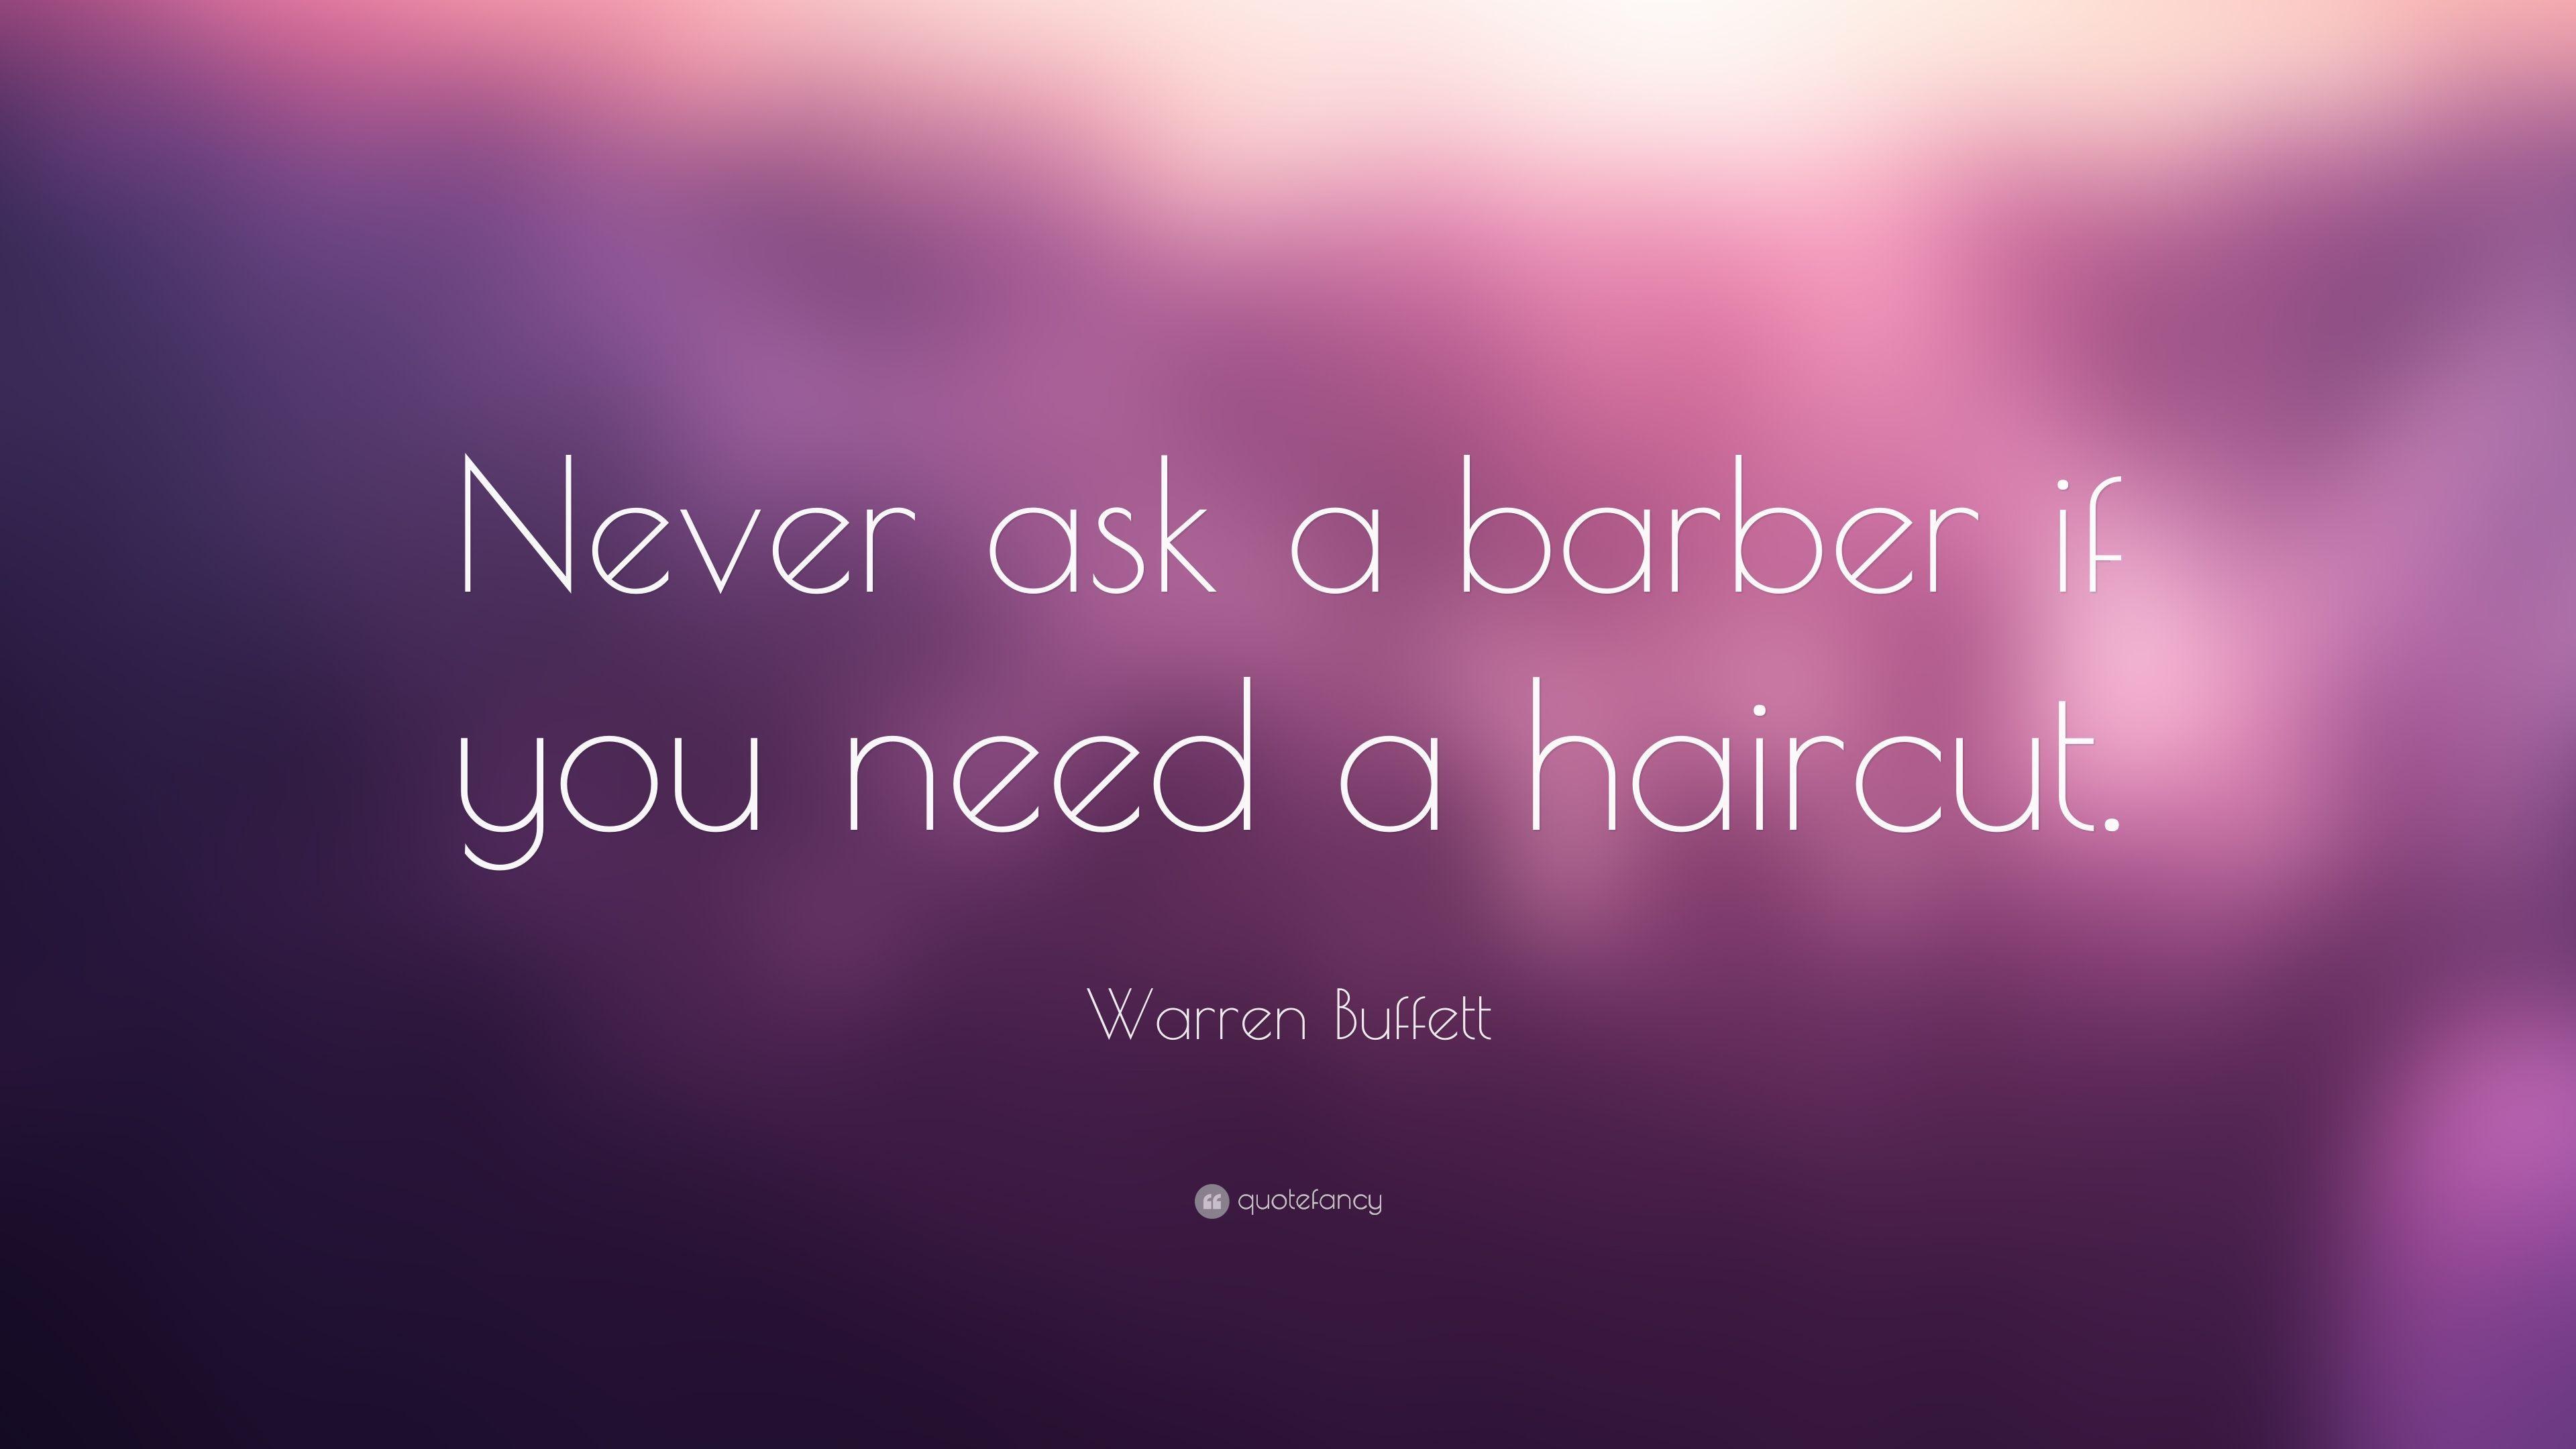 Warren Buffett Quote: “Never ask a barber if you need a haircut